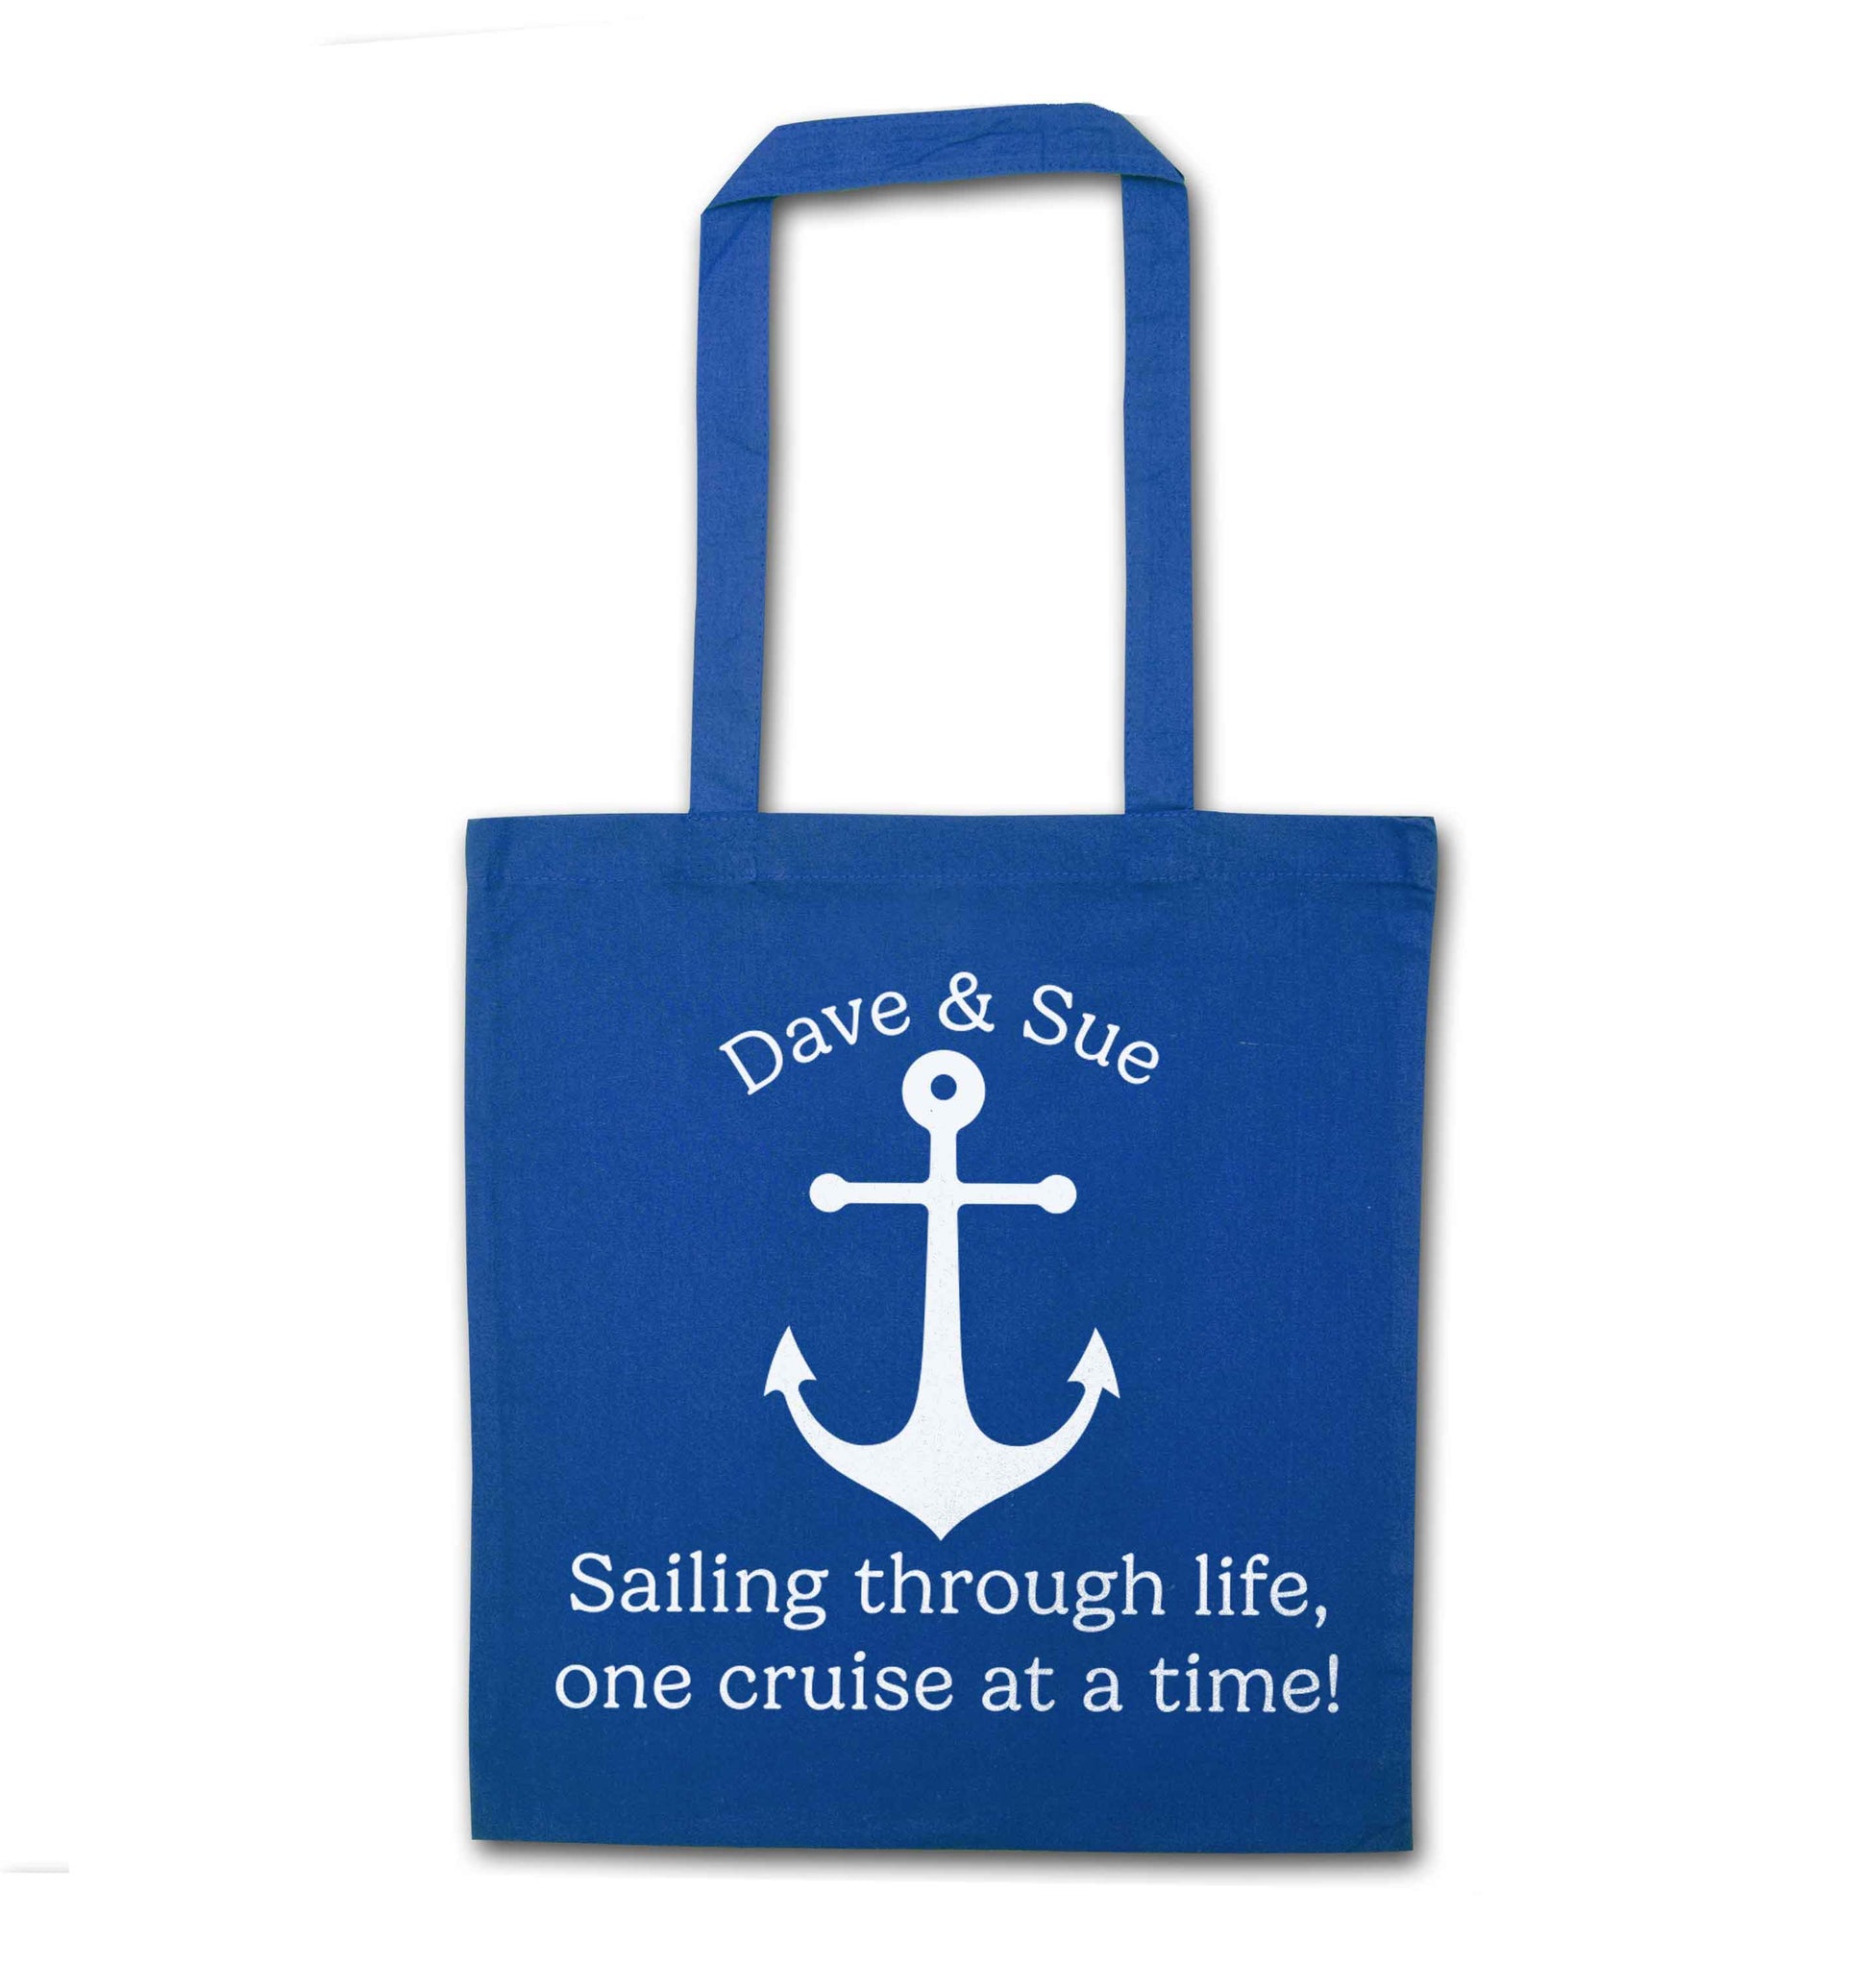 Sailing through life one cruise at a time - personalised blue tote bag